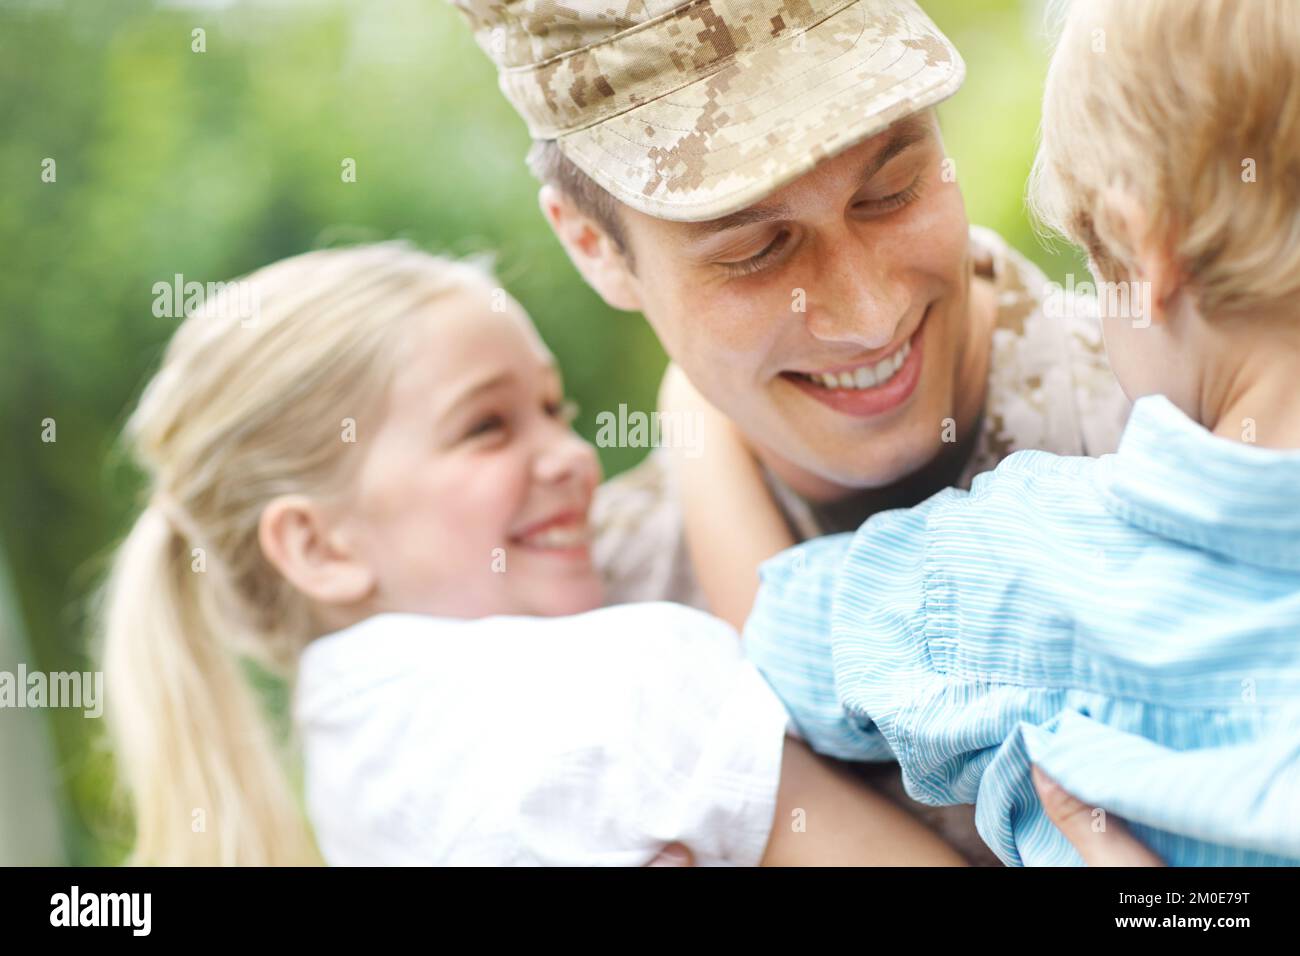 Hes their hero. A returning soldier being welcomed by his two young children. Stock Photo